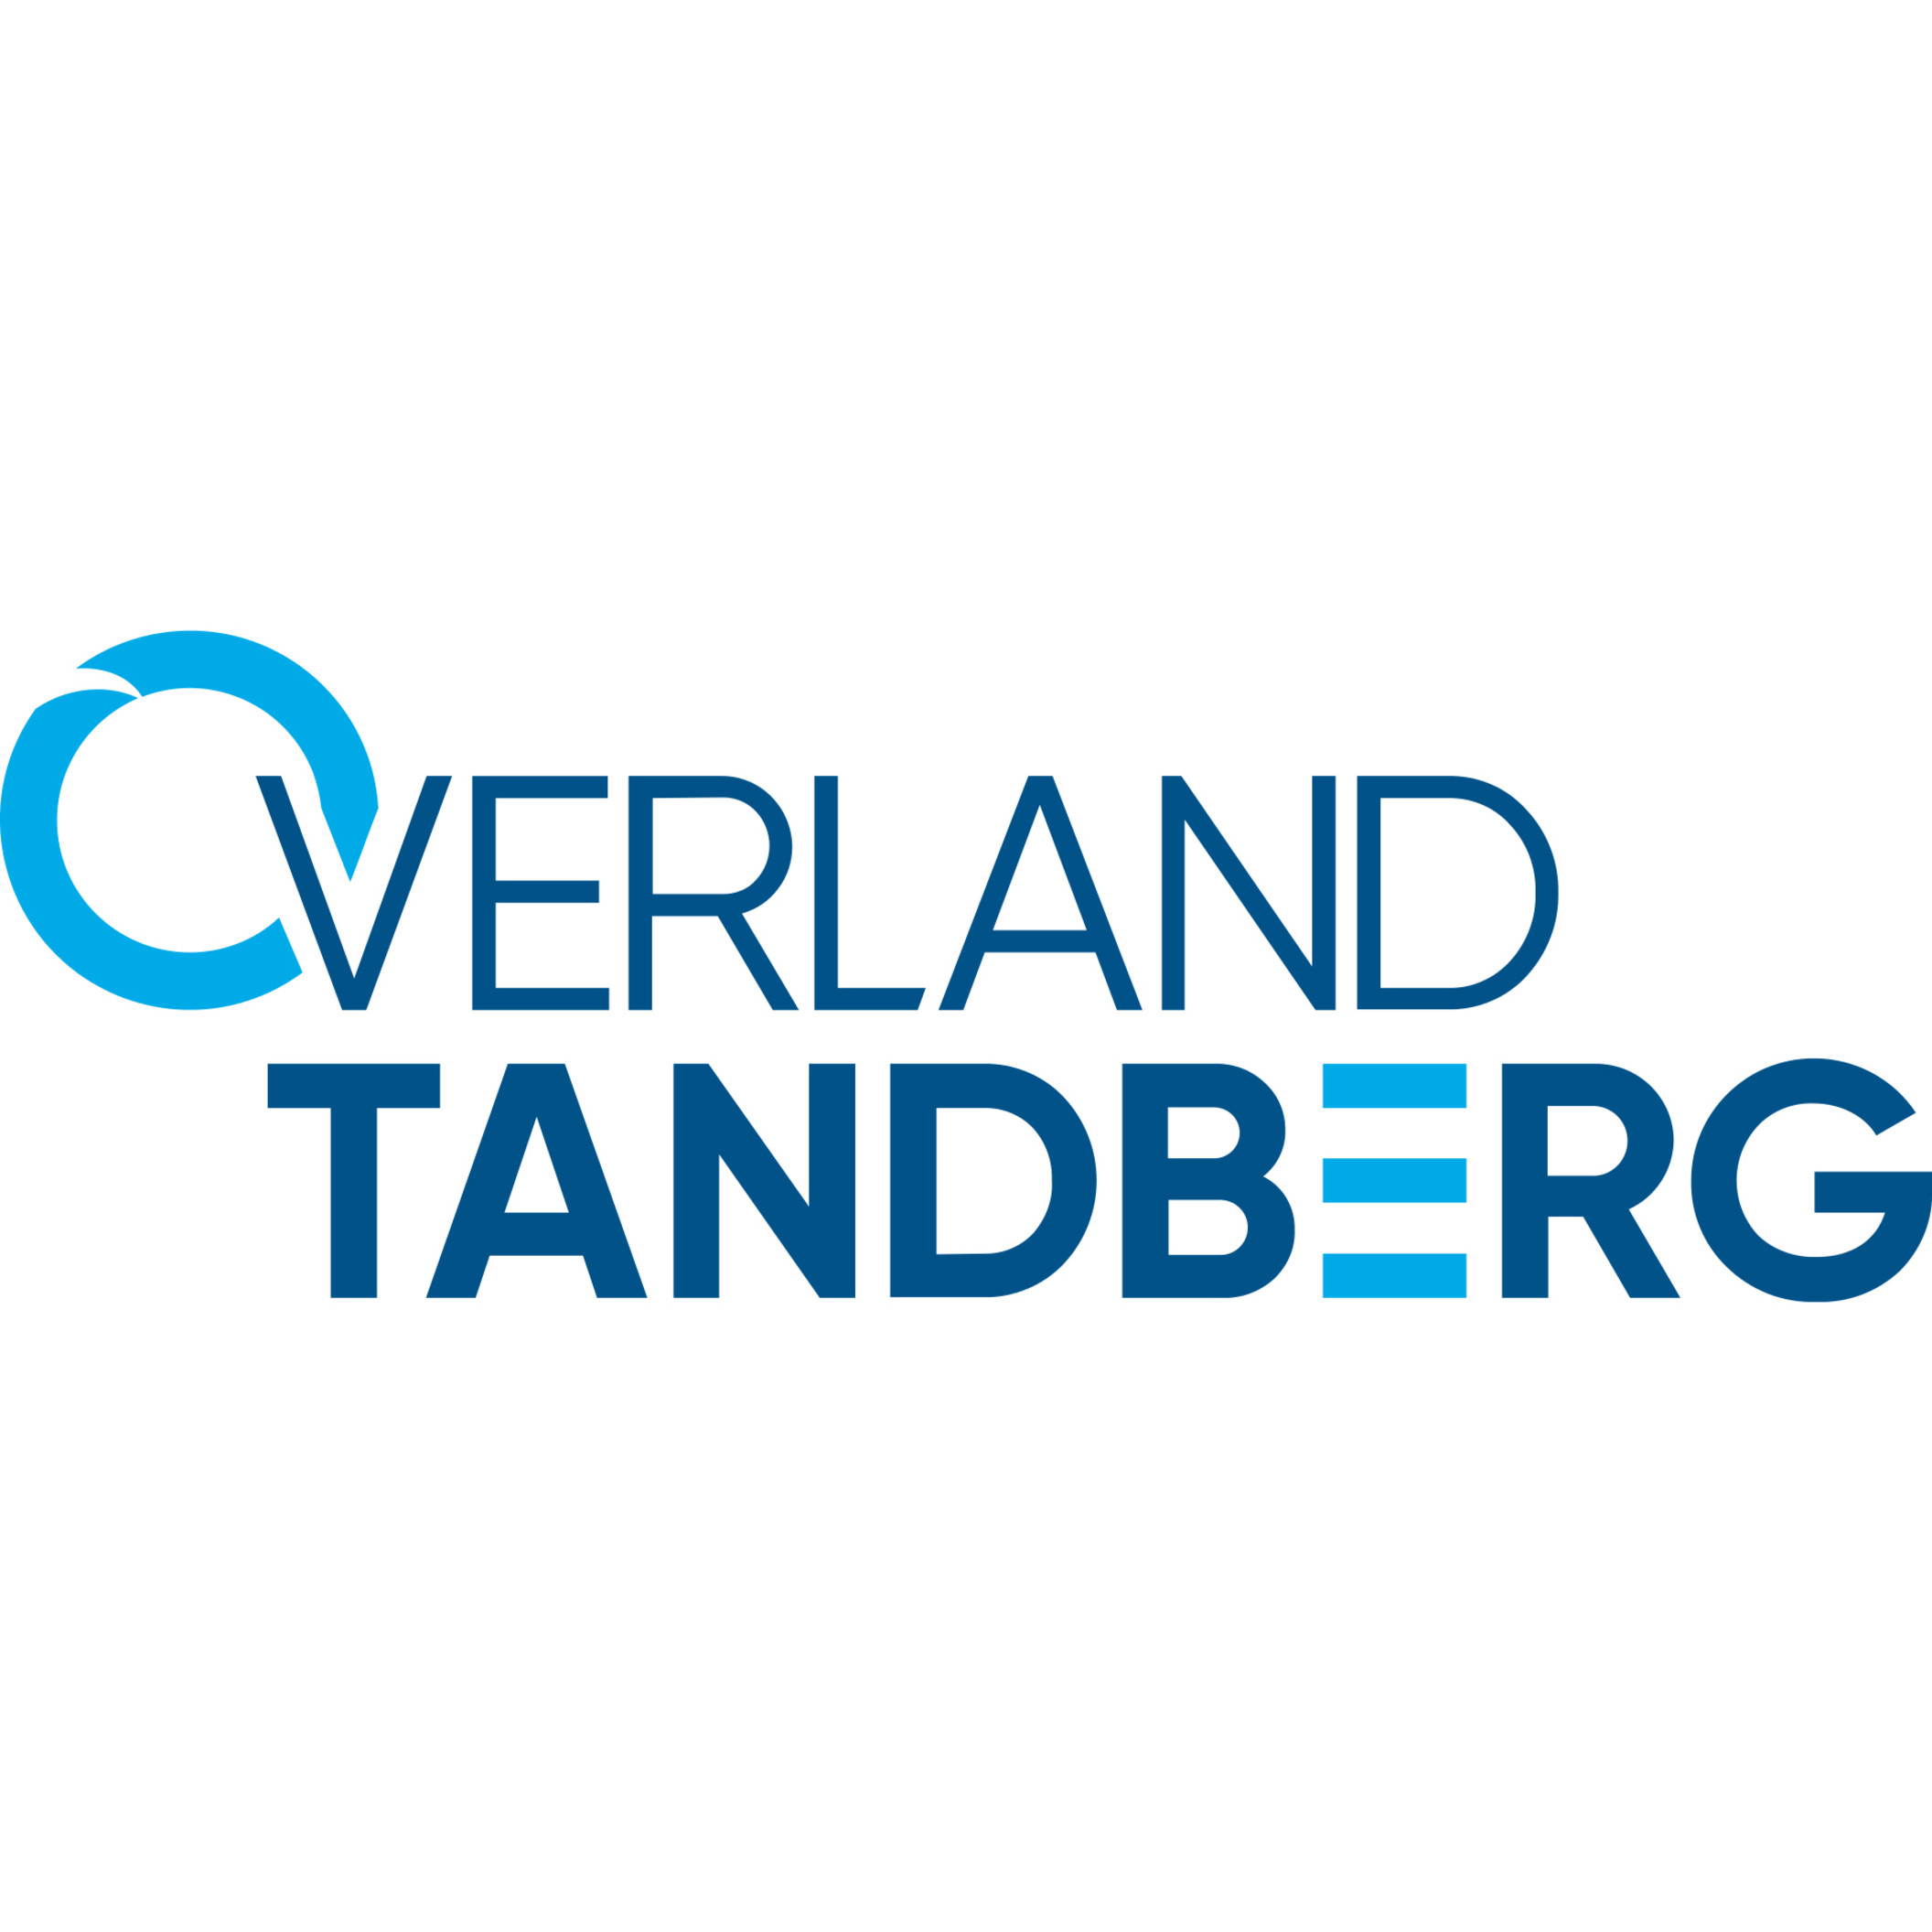 Overland -Tandberg LTO Ultrium 7 Data CartridgeLTO-7Yes6 TB (Native) / 15 TB (Compressed)2775.59 ft Tape Length1 Pack 434131